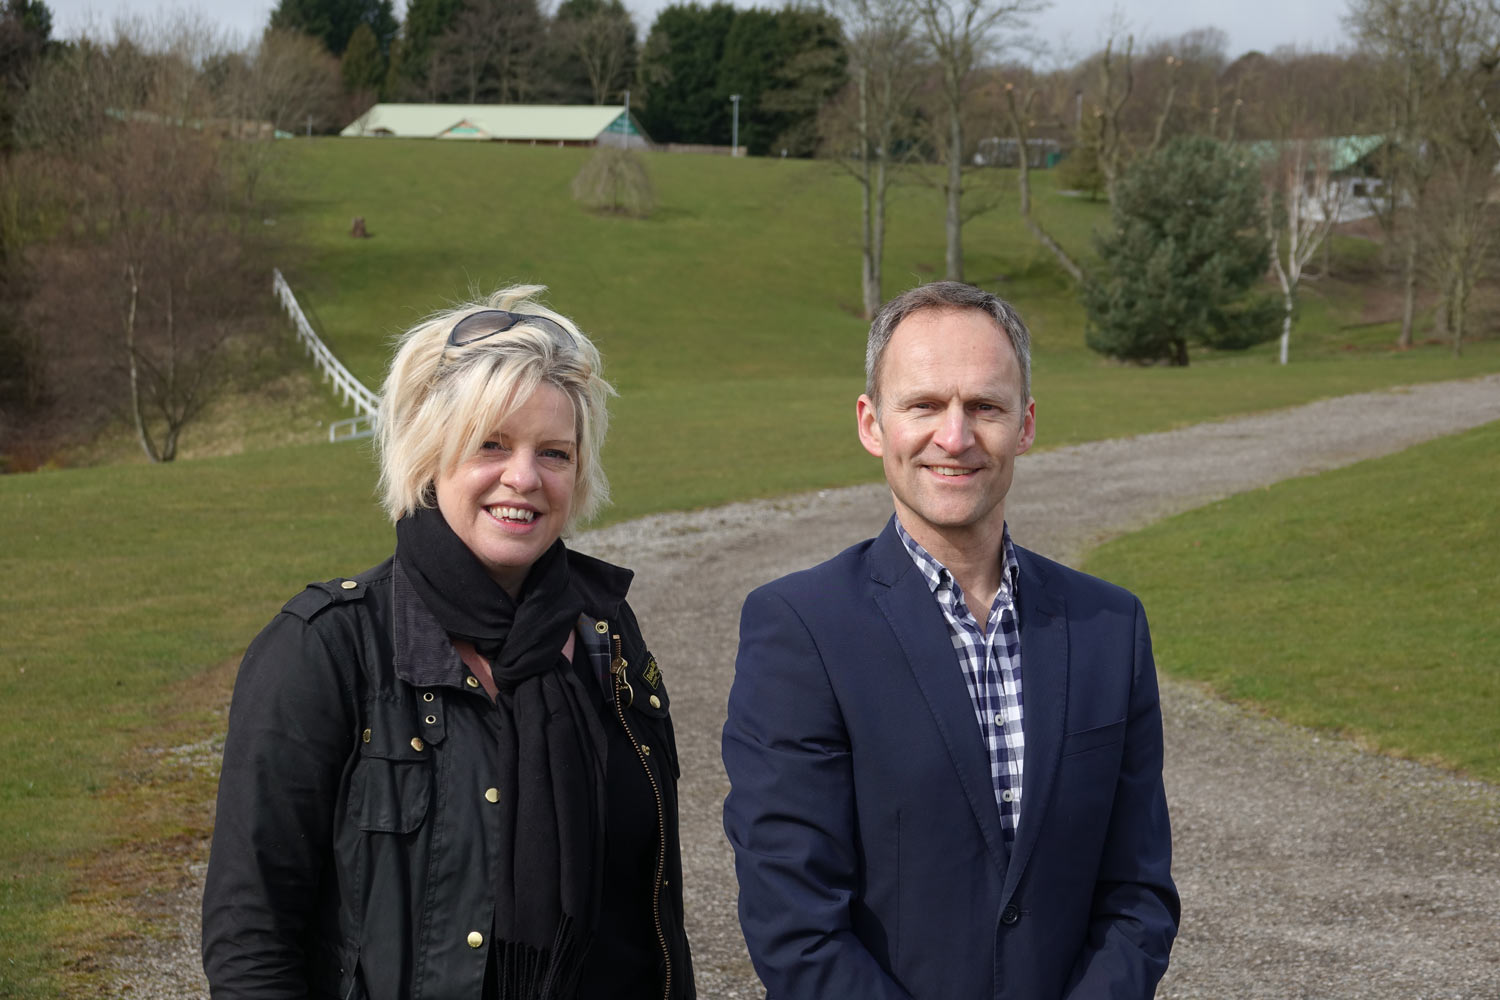 Cathy McConaghy, StrEAT organiser with Paul Ashton, Head of Sales at Yorkshire Event Centre in the Yorkshire Showground